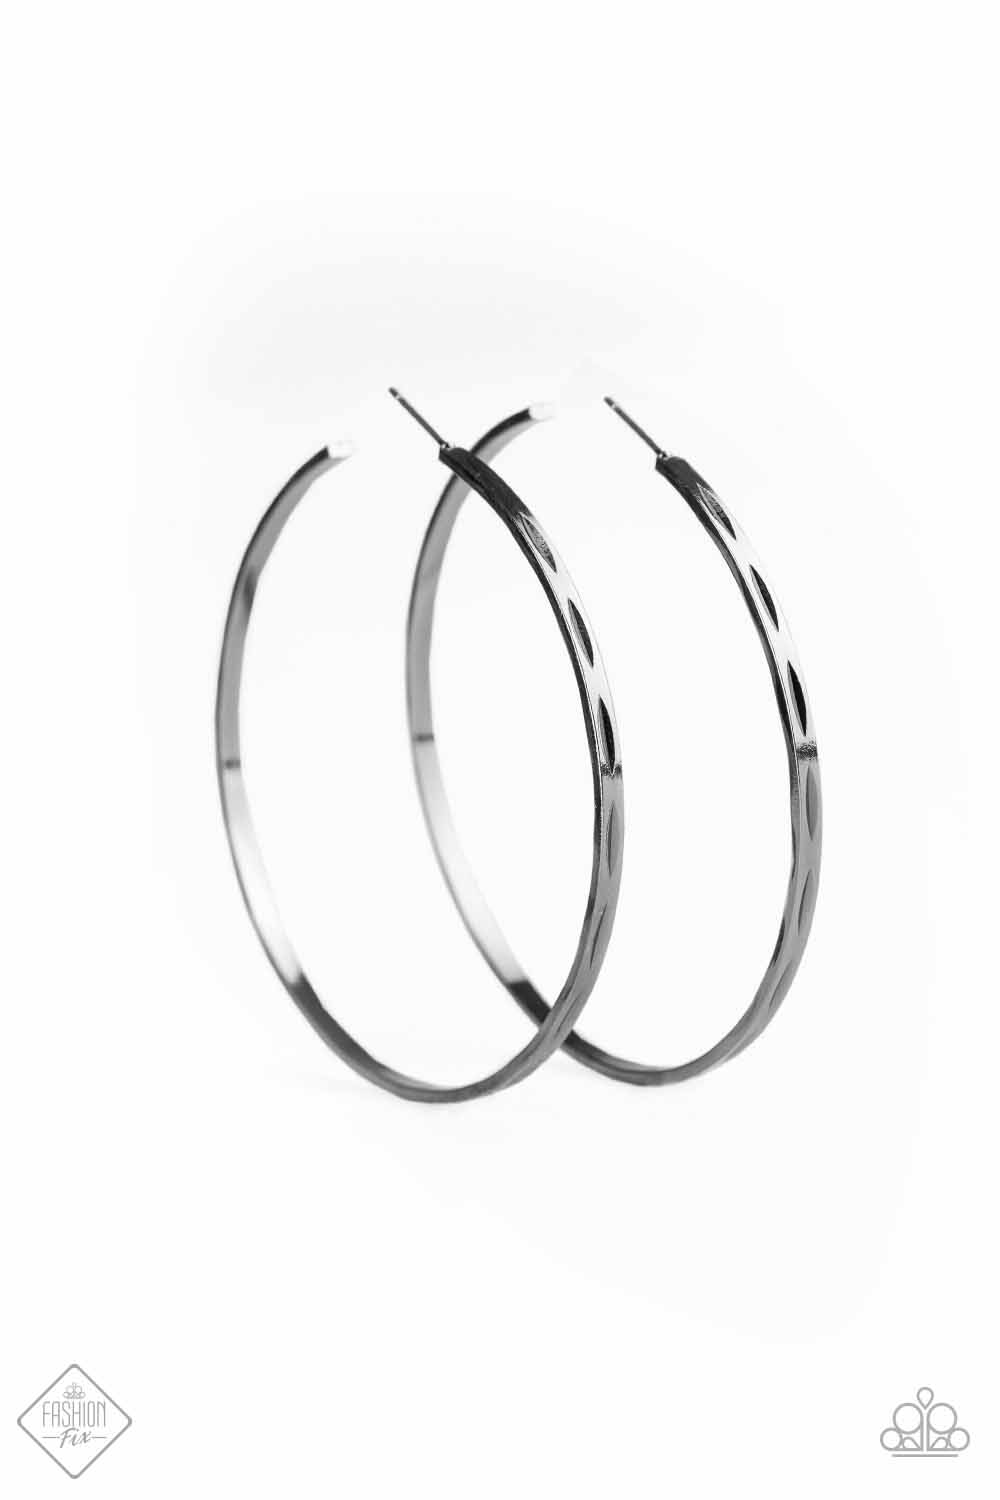 Paparazzi Full On Radical Black Post Hoop Earrings - Fashion Fix Magnificent Musings July 2020